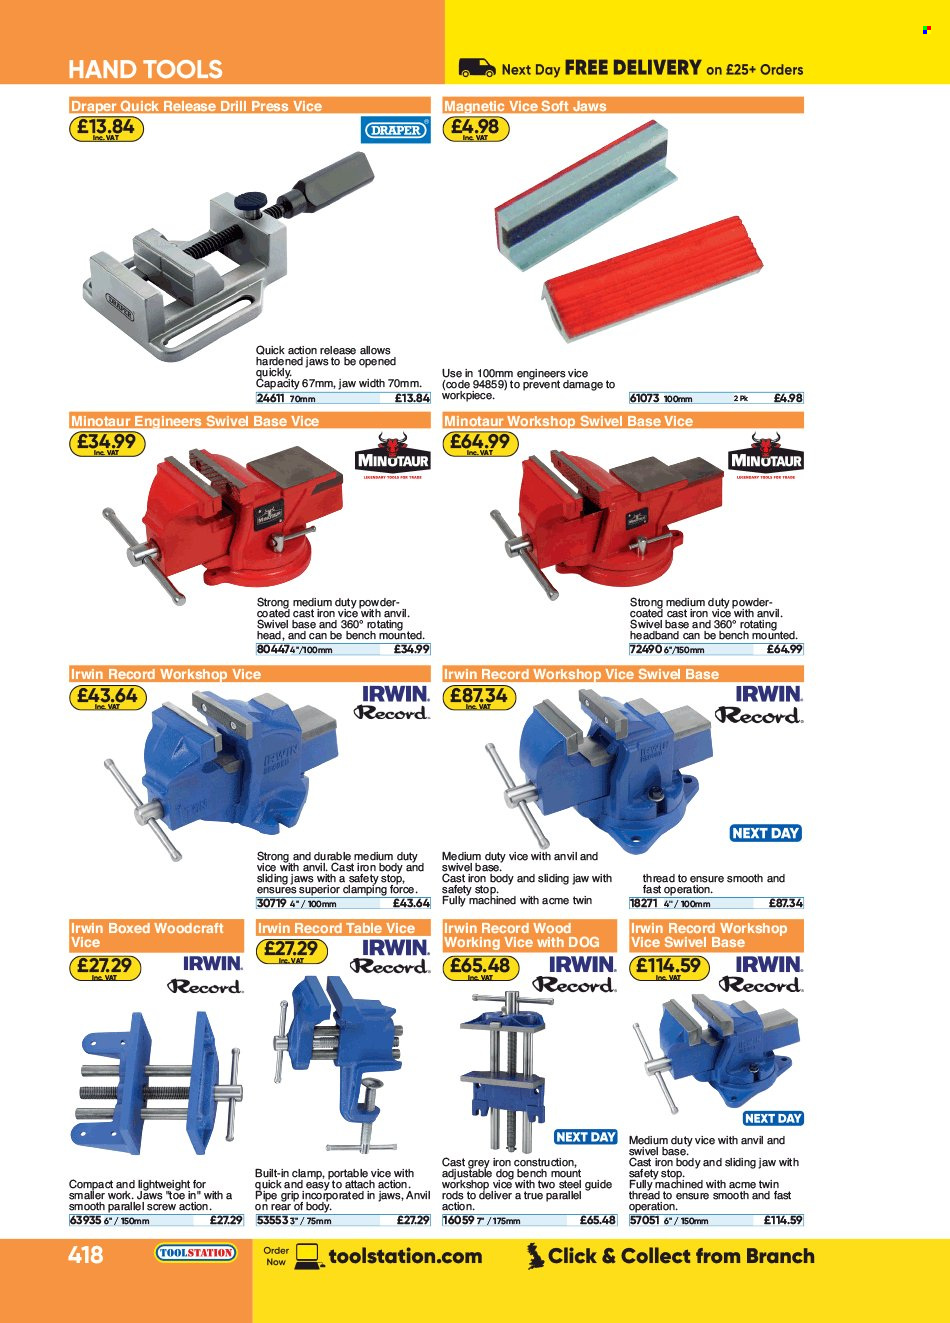 Toolstation offer . Page 418.